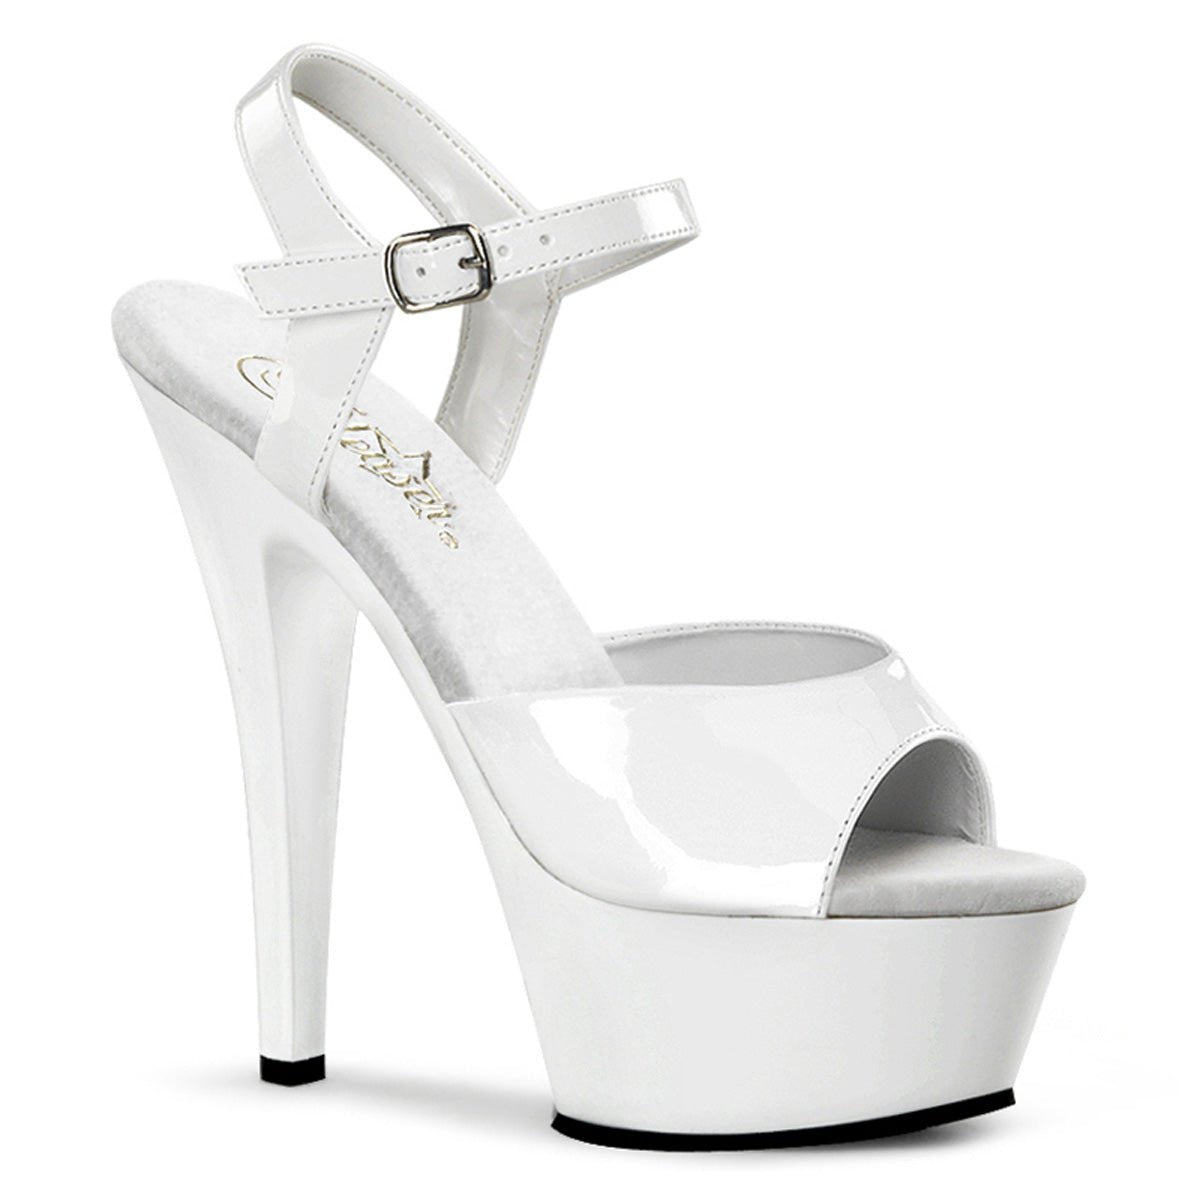 Pleaser Kiss 209 White - Model Express VancouverShoes